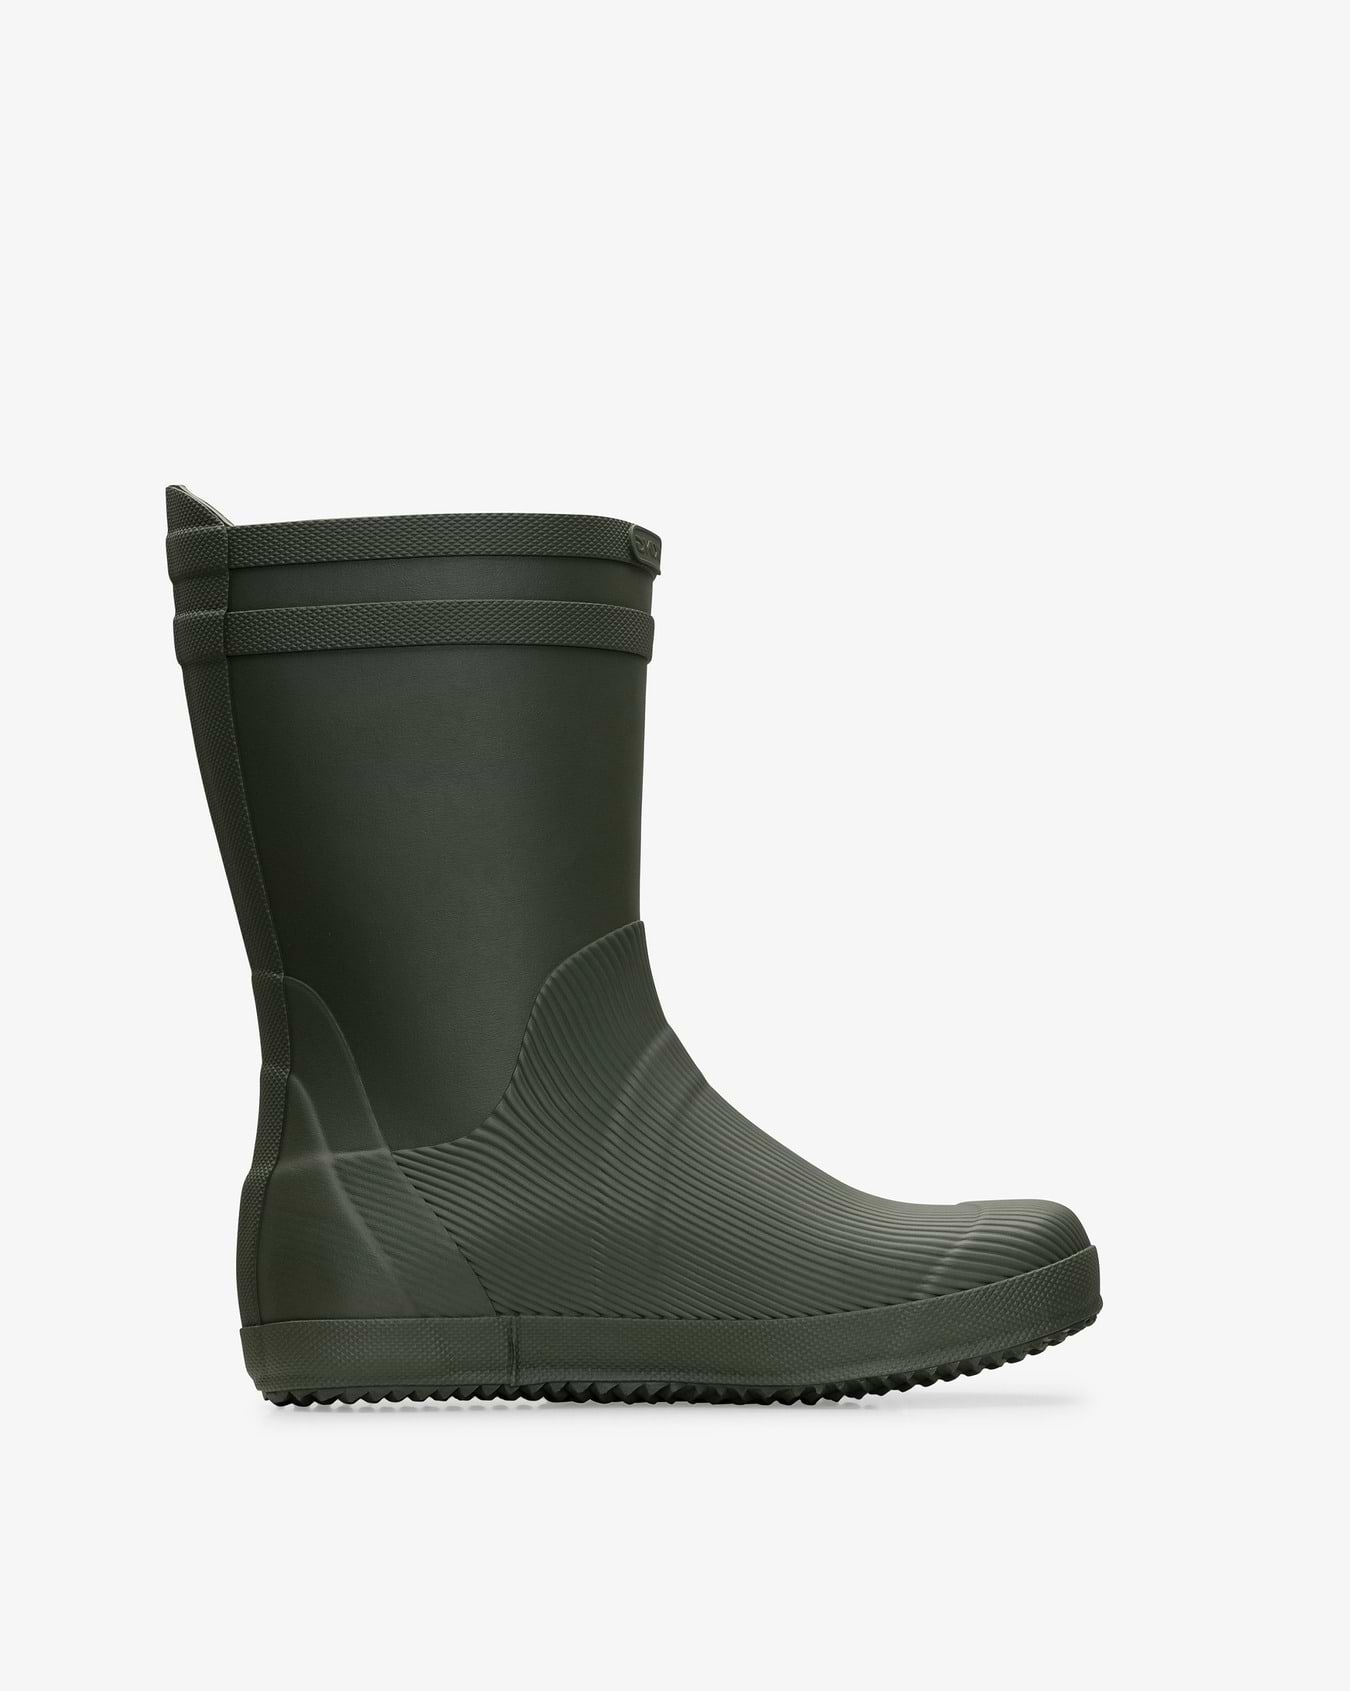 Vetus Olive Rubber Boot